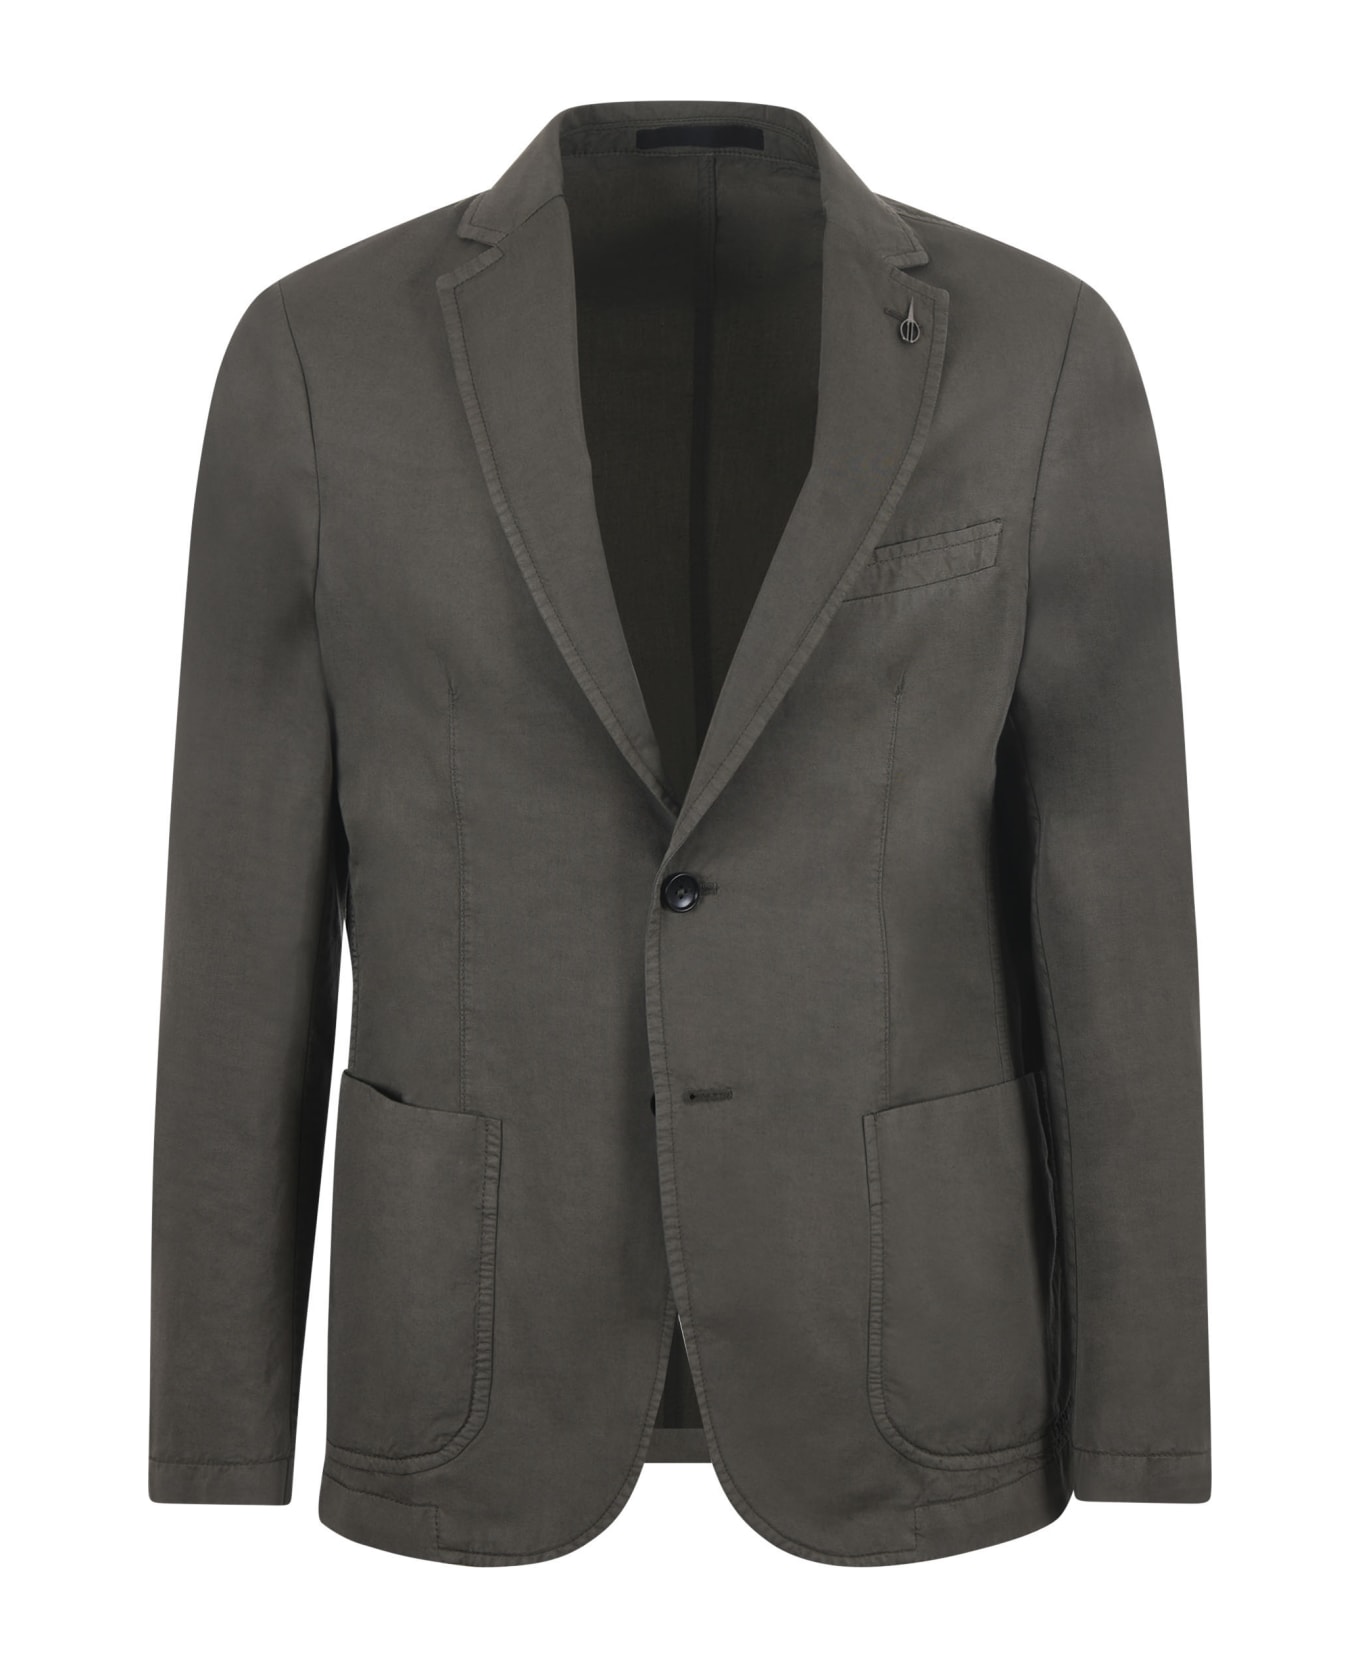 Paoloni Jacket In Cotton And Linen Blend - Verde militare